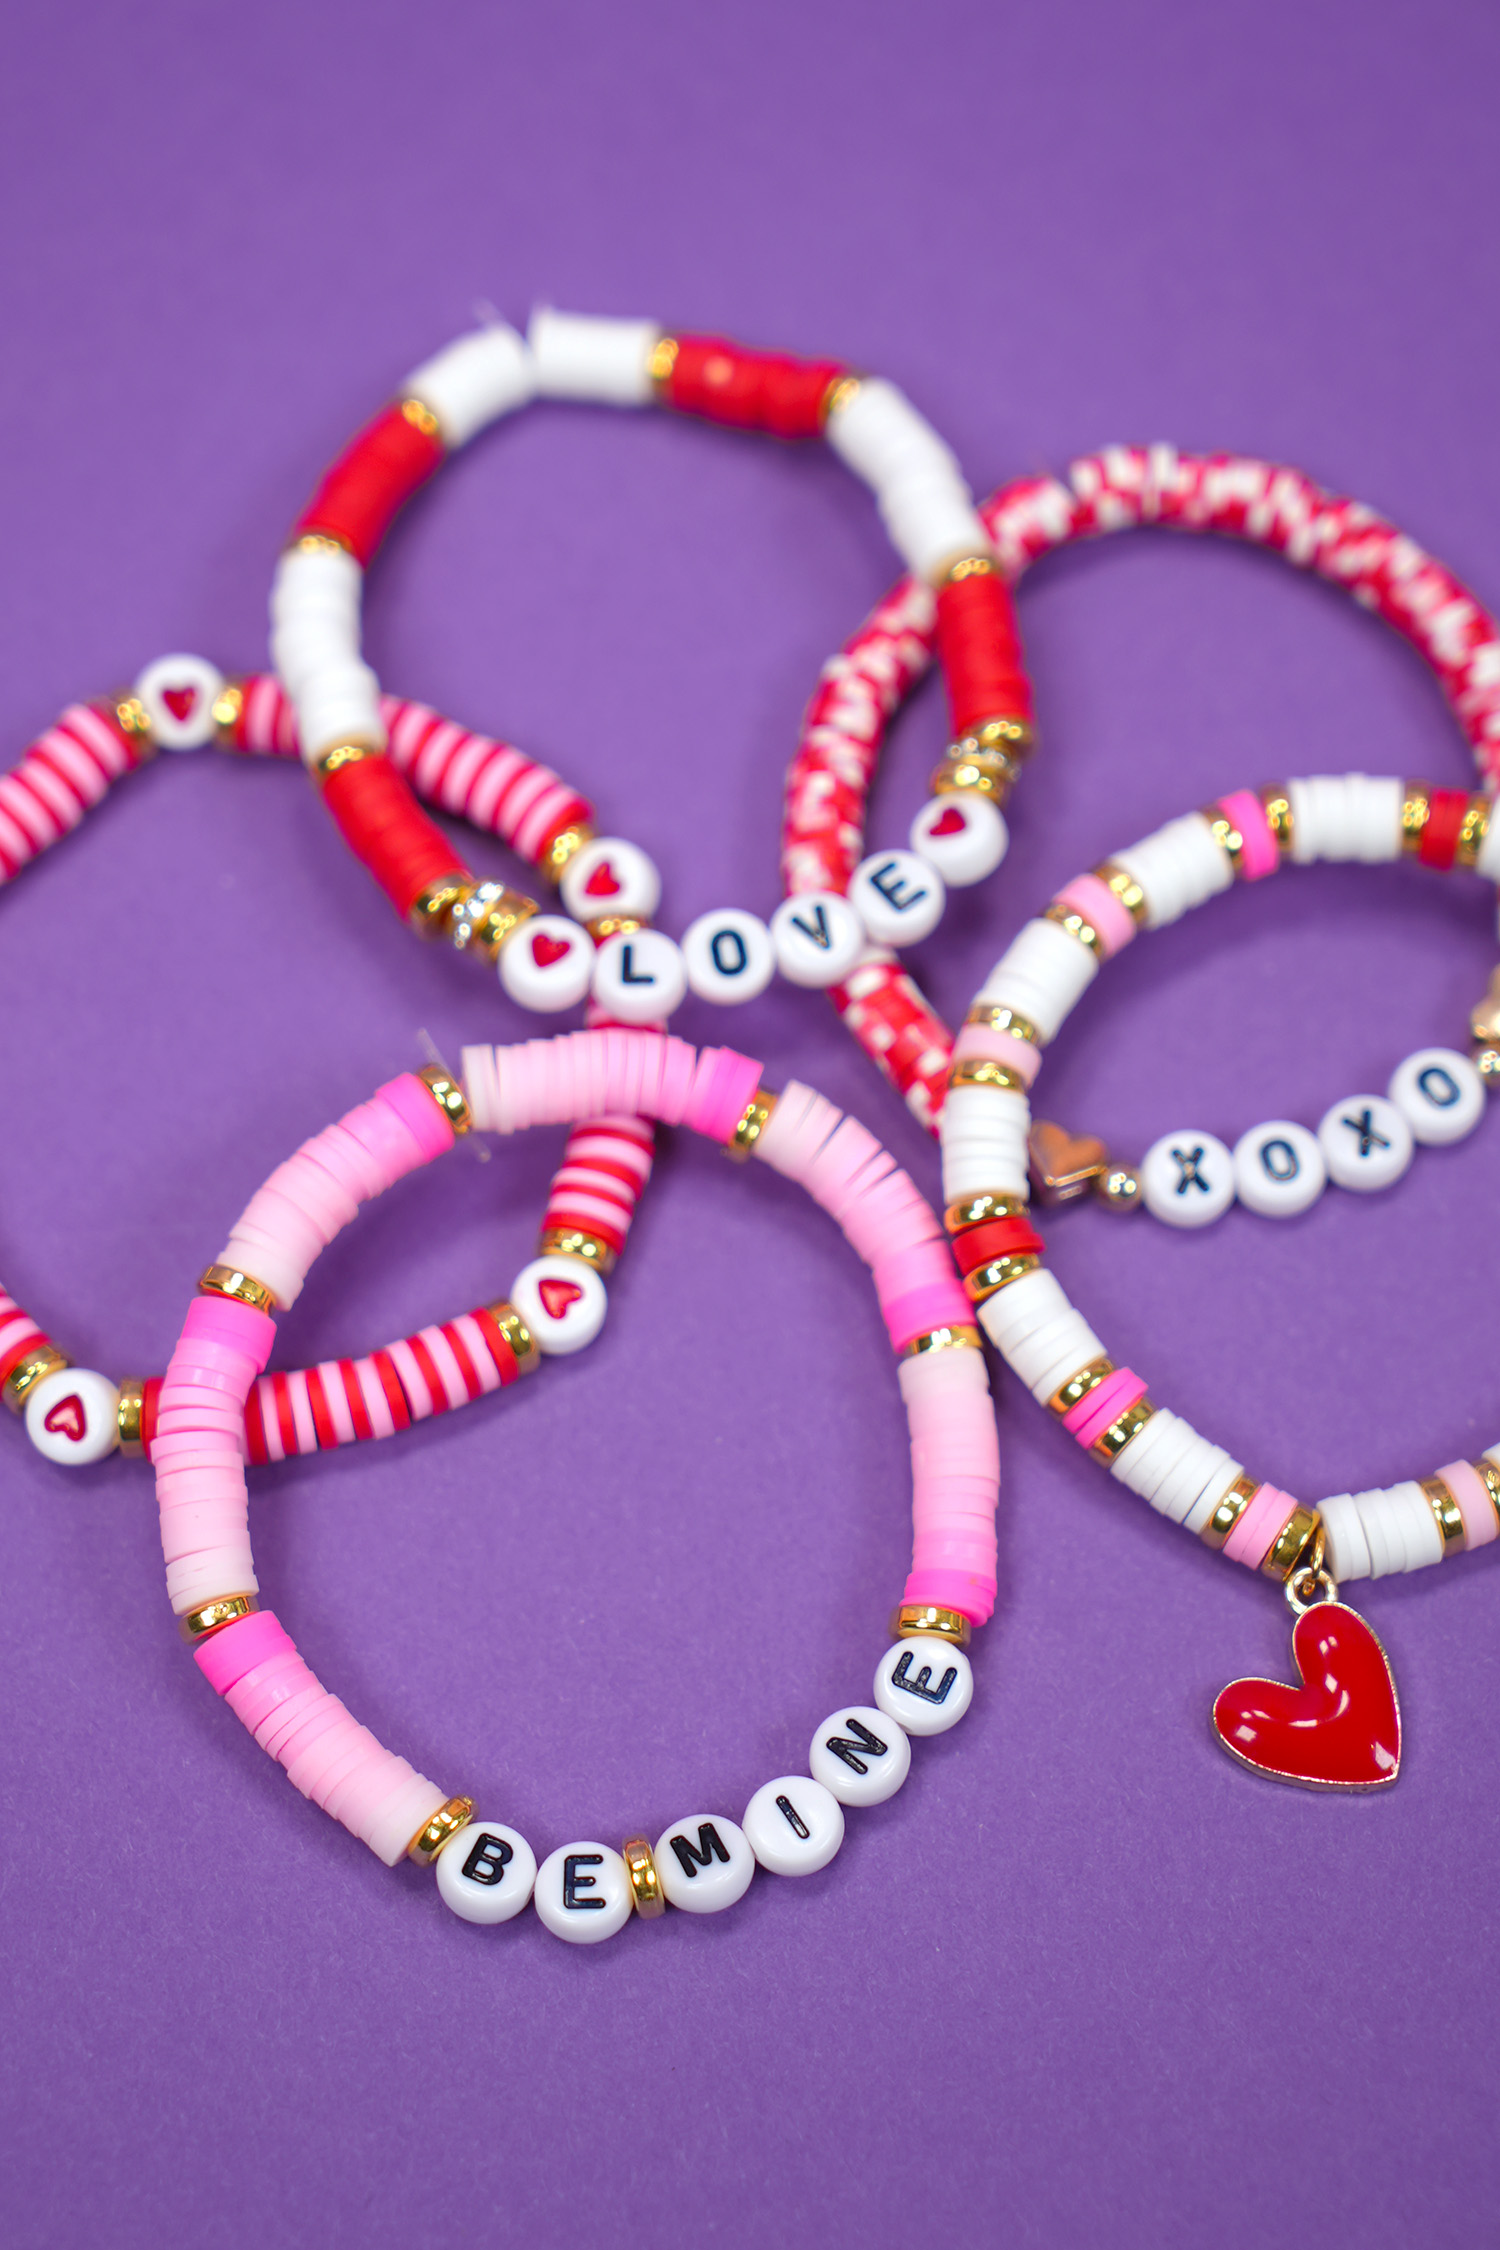 Red, White, and Black Clay Bead Bracelet Kids Size